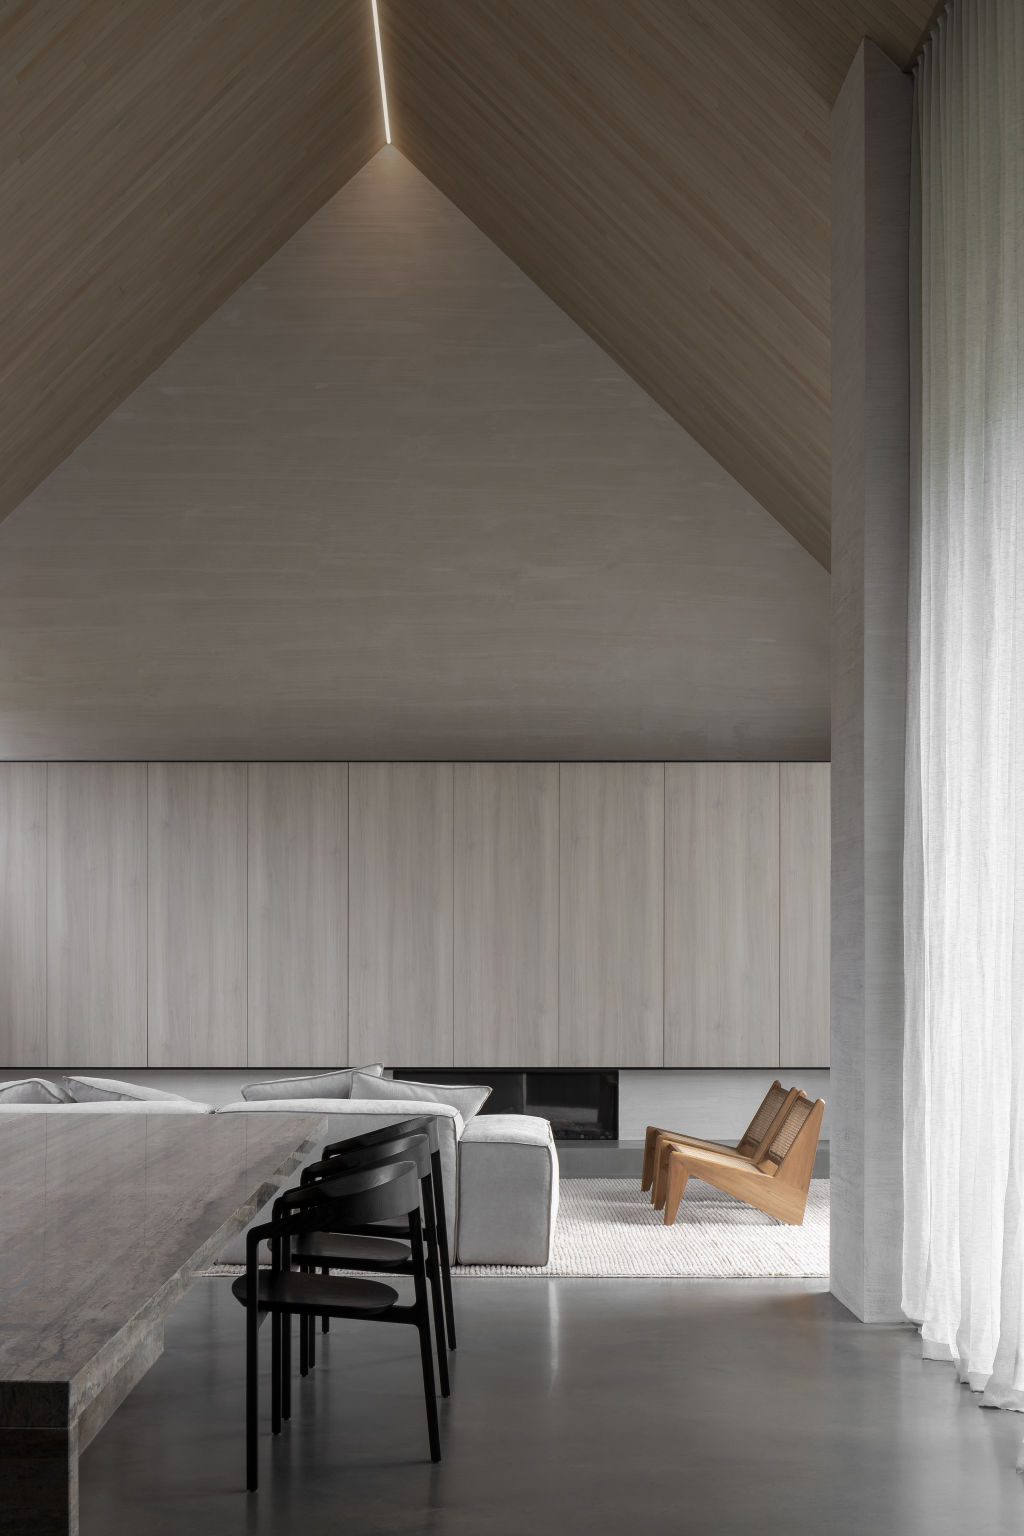 The 6.5-metre gabled ceiling makes a statement. Photo: Tim Kaye